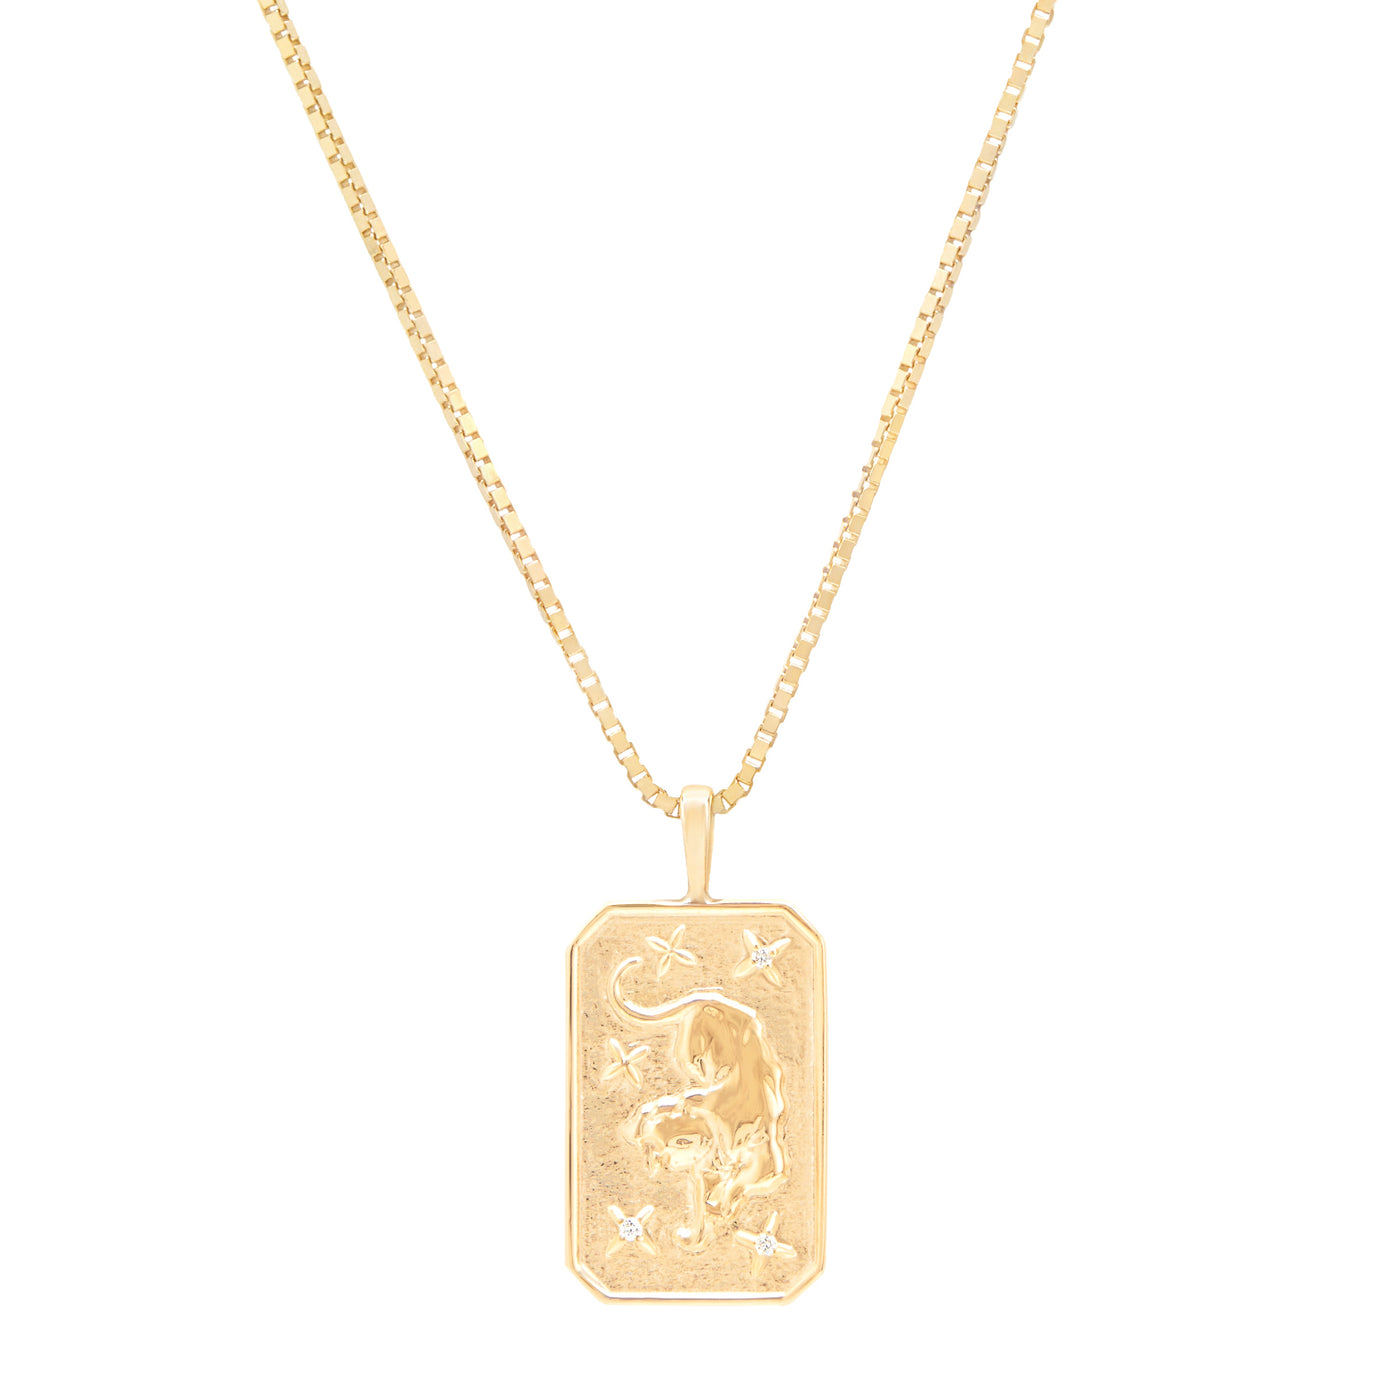 Tiger pendent yellow gold with box chain on white background with diamond details